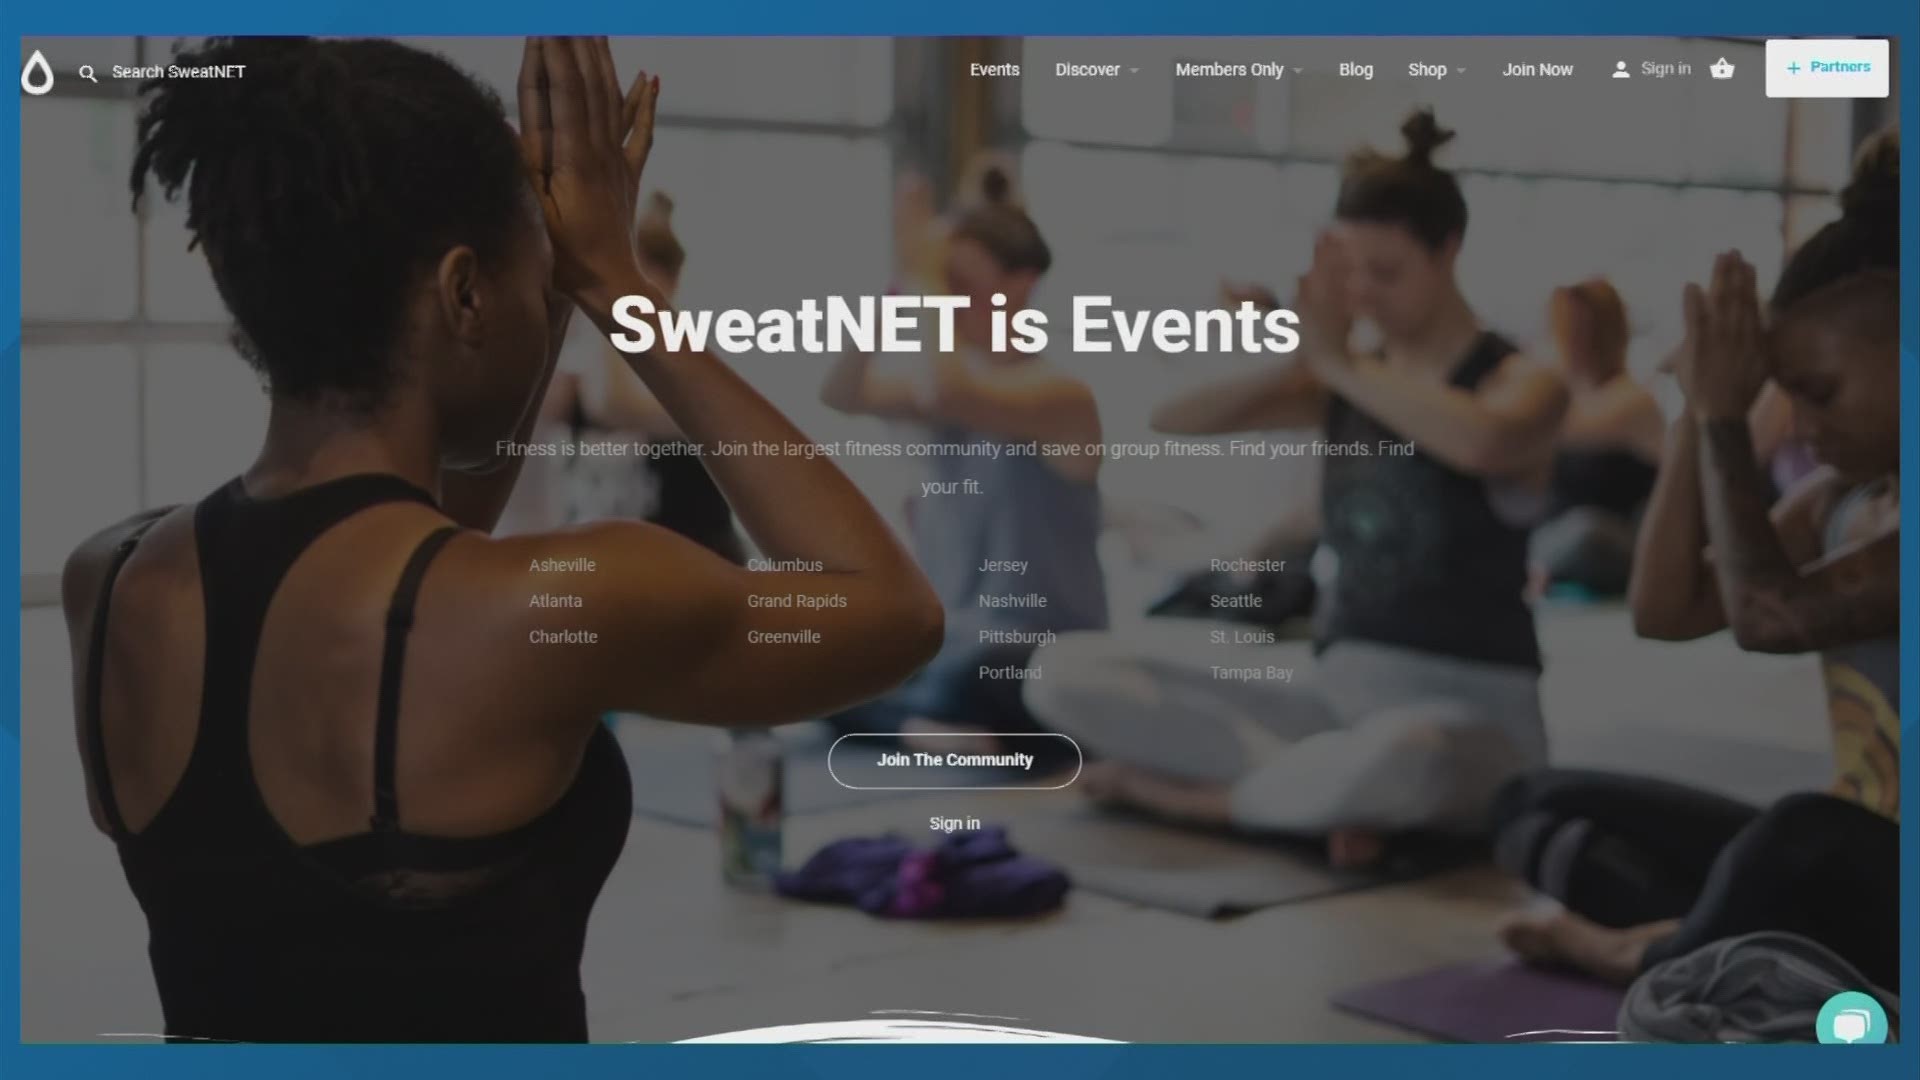 SweatNet is a “fitness community” which gives its members deals and discounts on workouts, meals, and other items in Columbus.